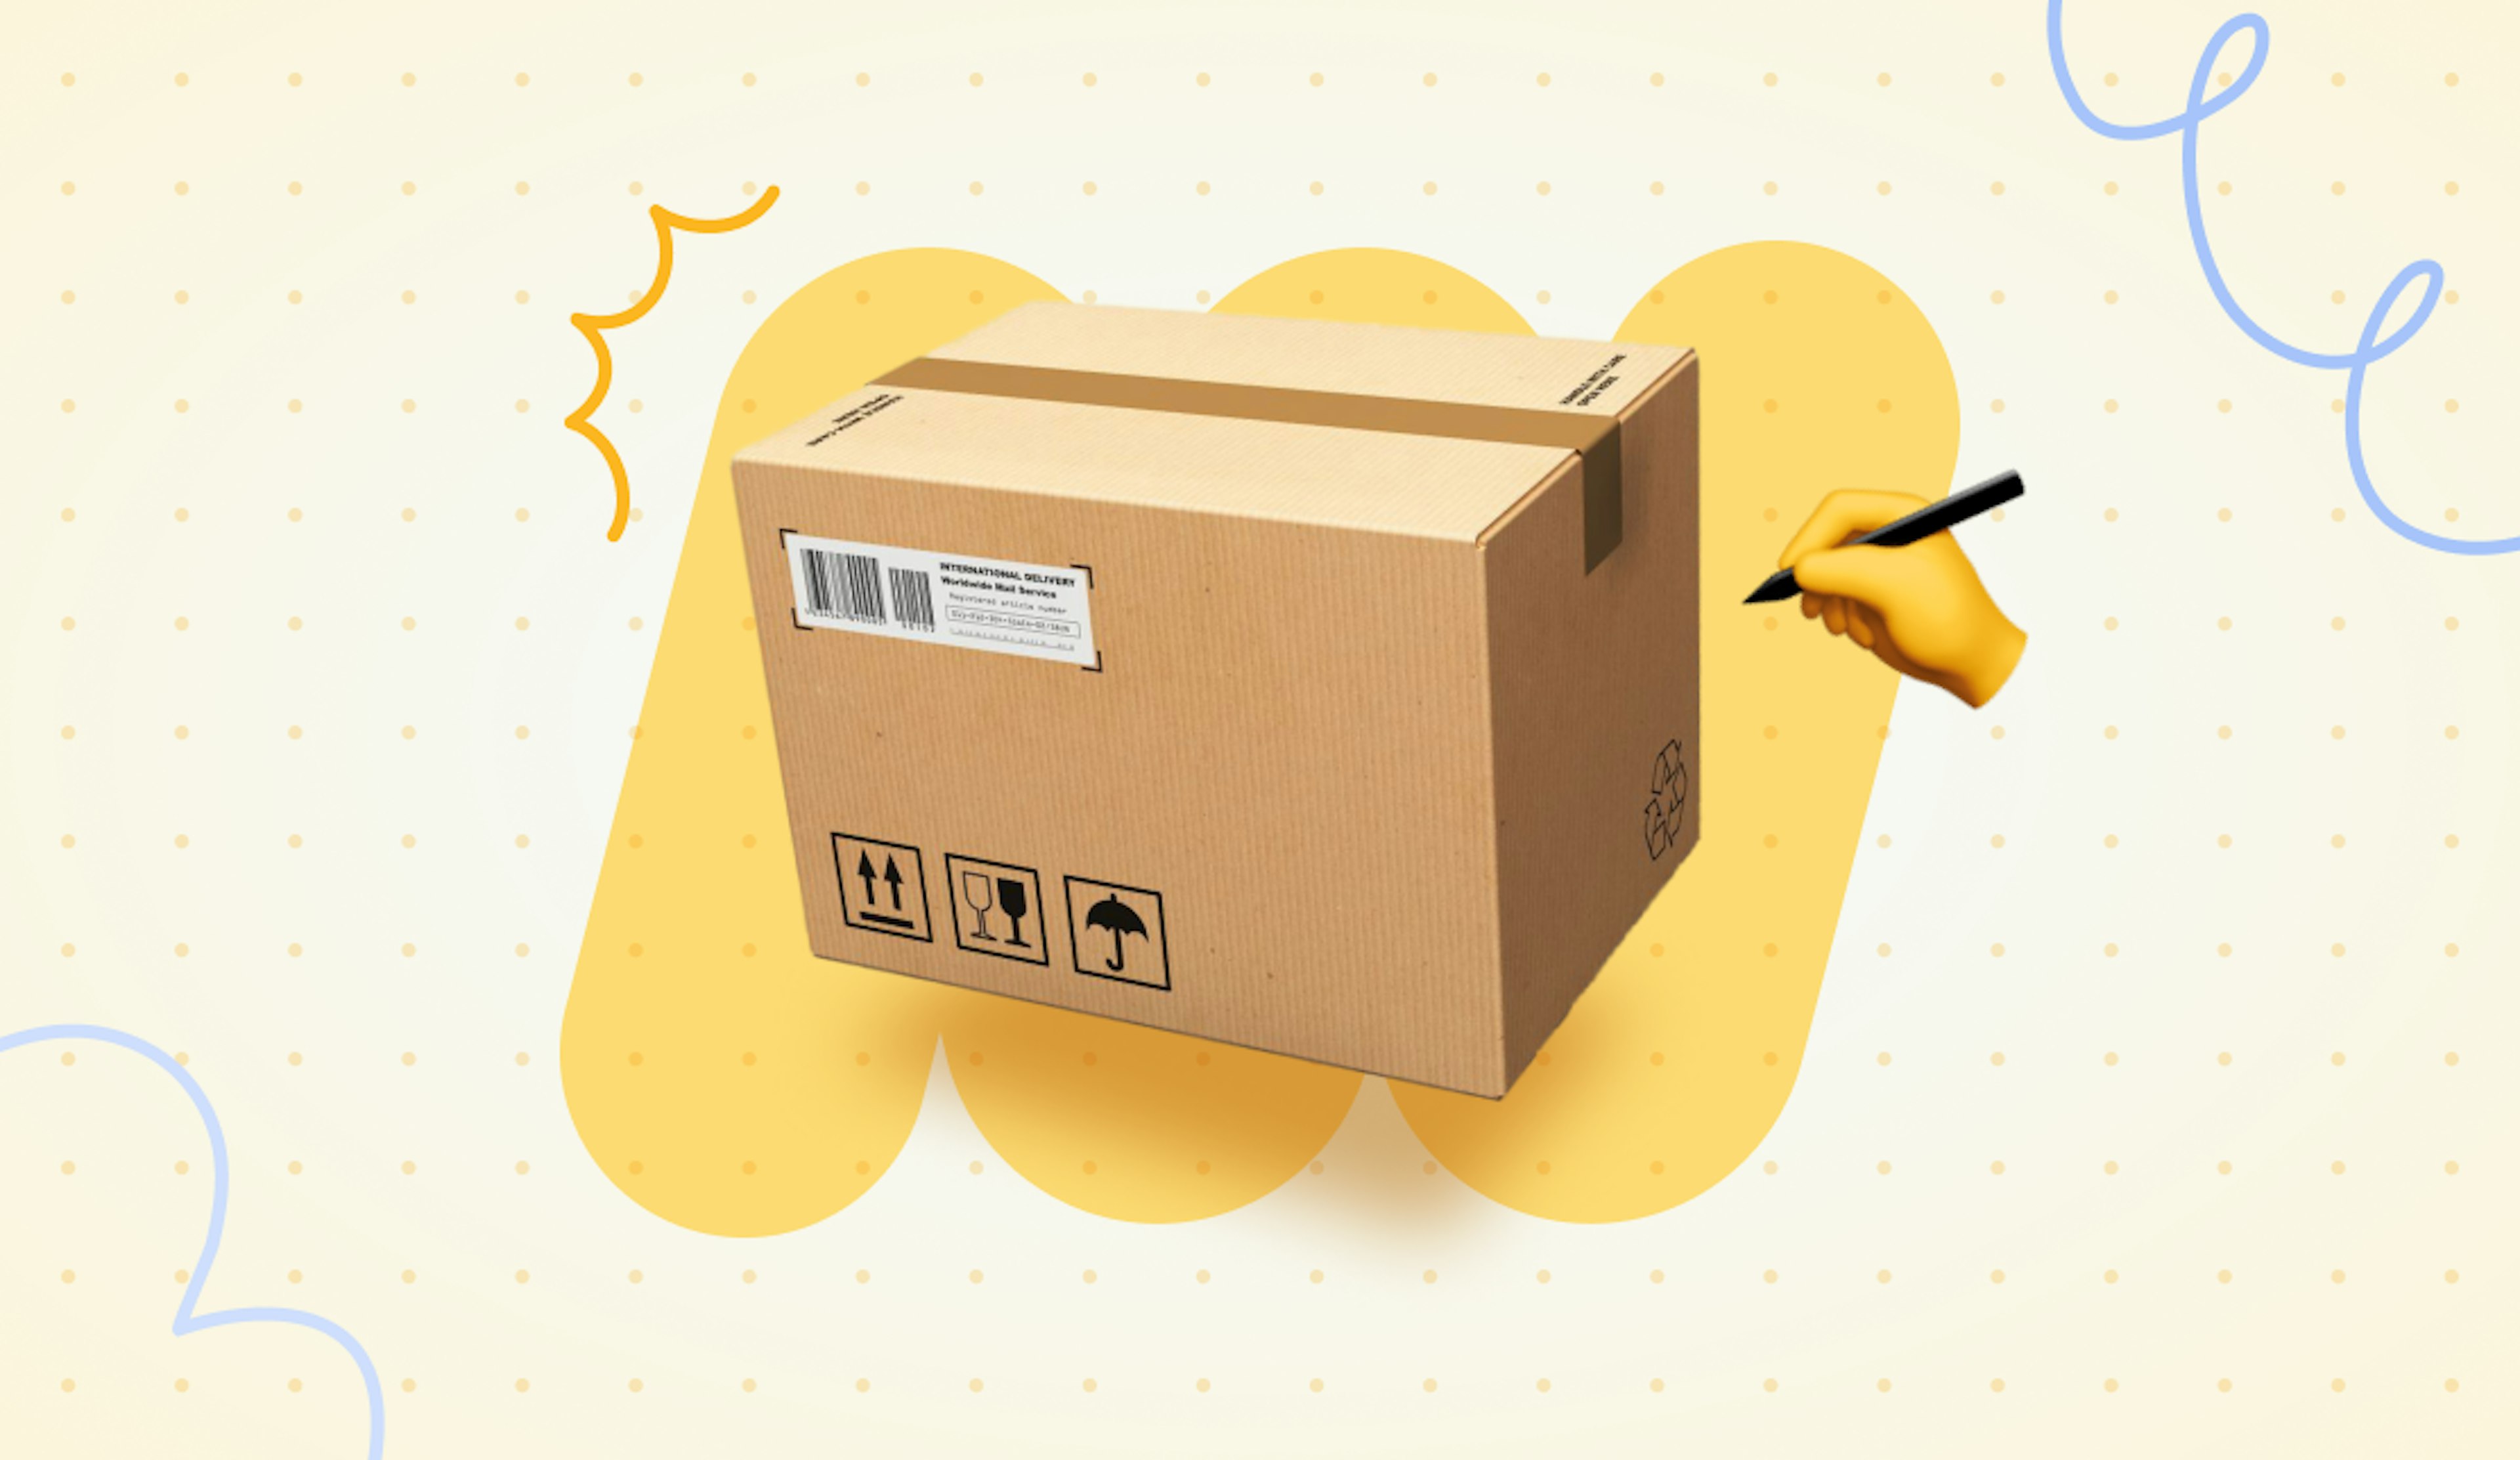 What is a packing slip? Cardboard box being written on by an emoji hand holding a pen